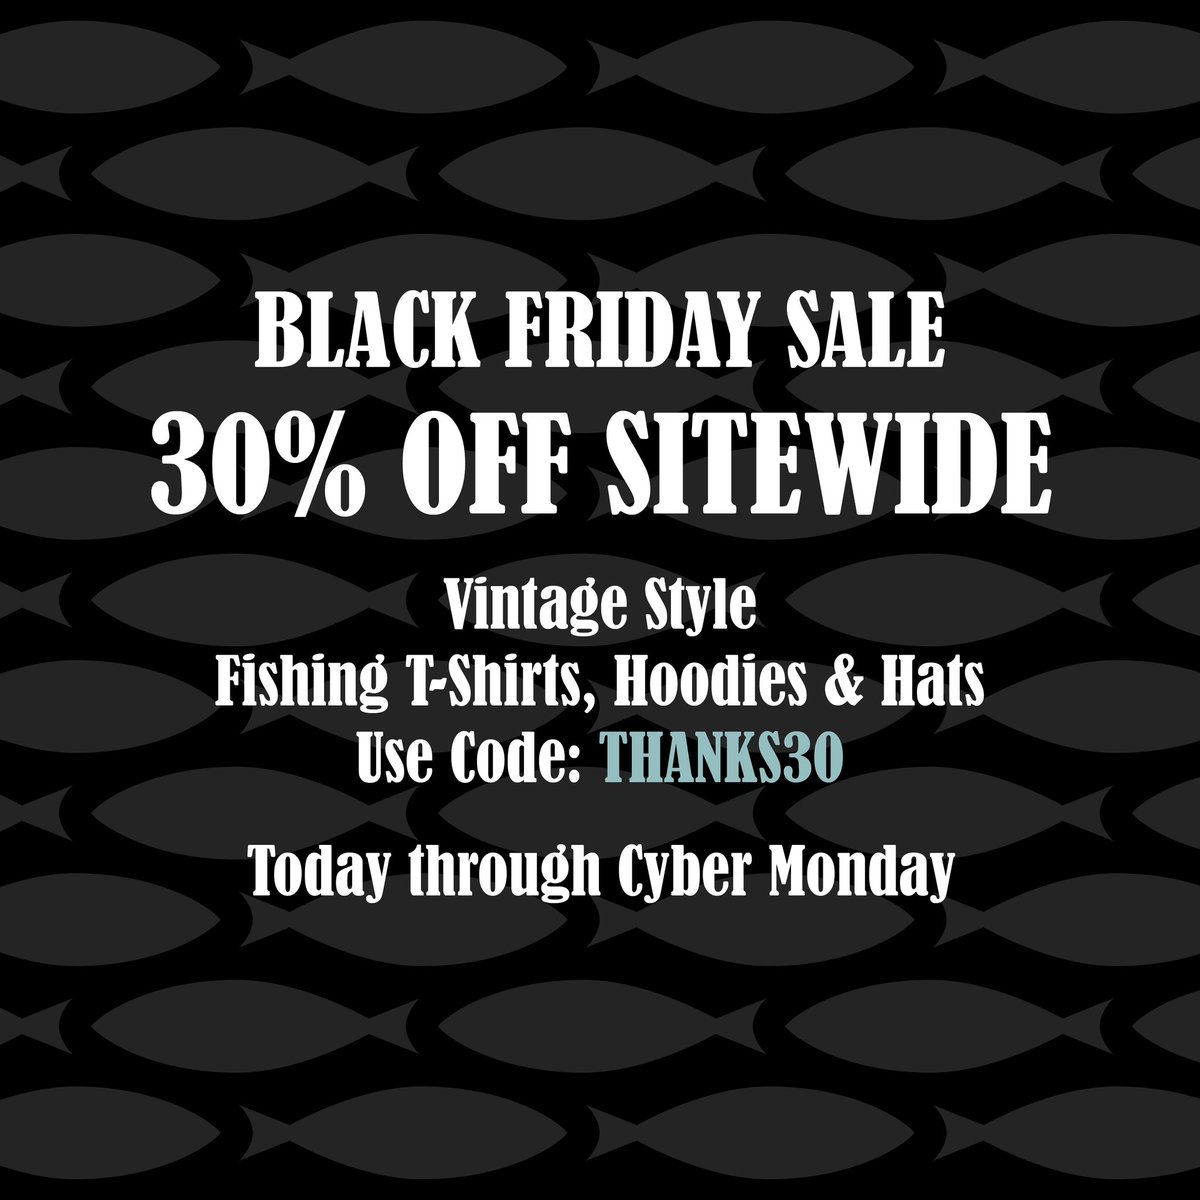 Vintage style #fishing t-shirts, hoodies and hats - on sale now. Every purchase helps #takeakidfishing🎣
#fishingsale #fishingshirt #fishinghat